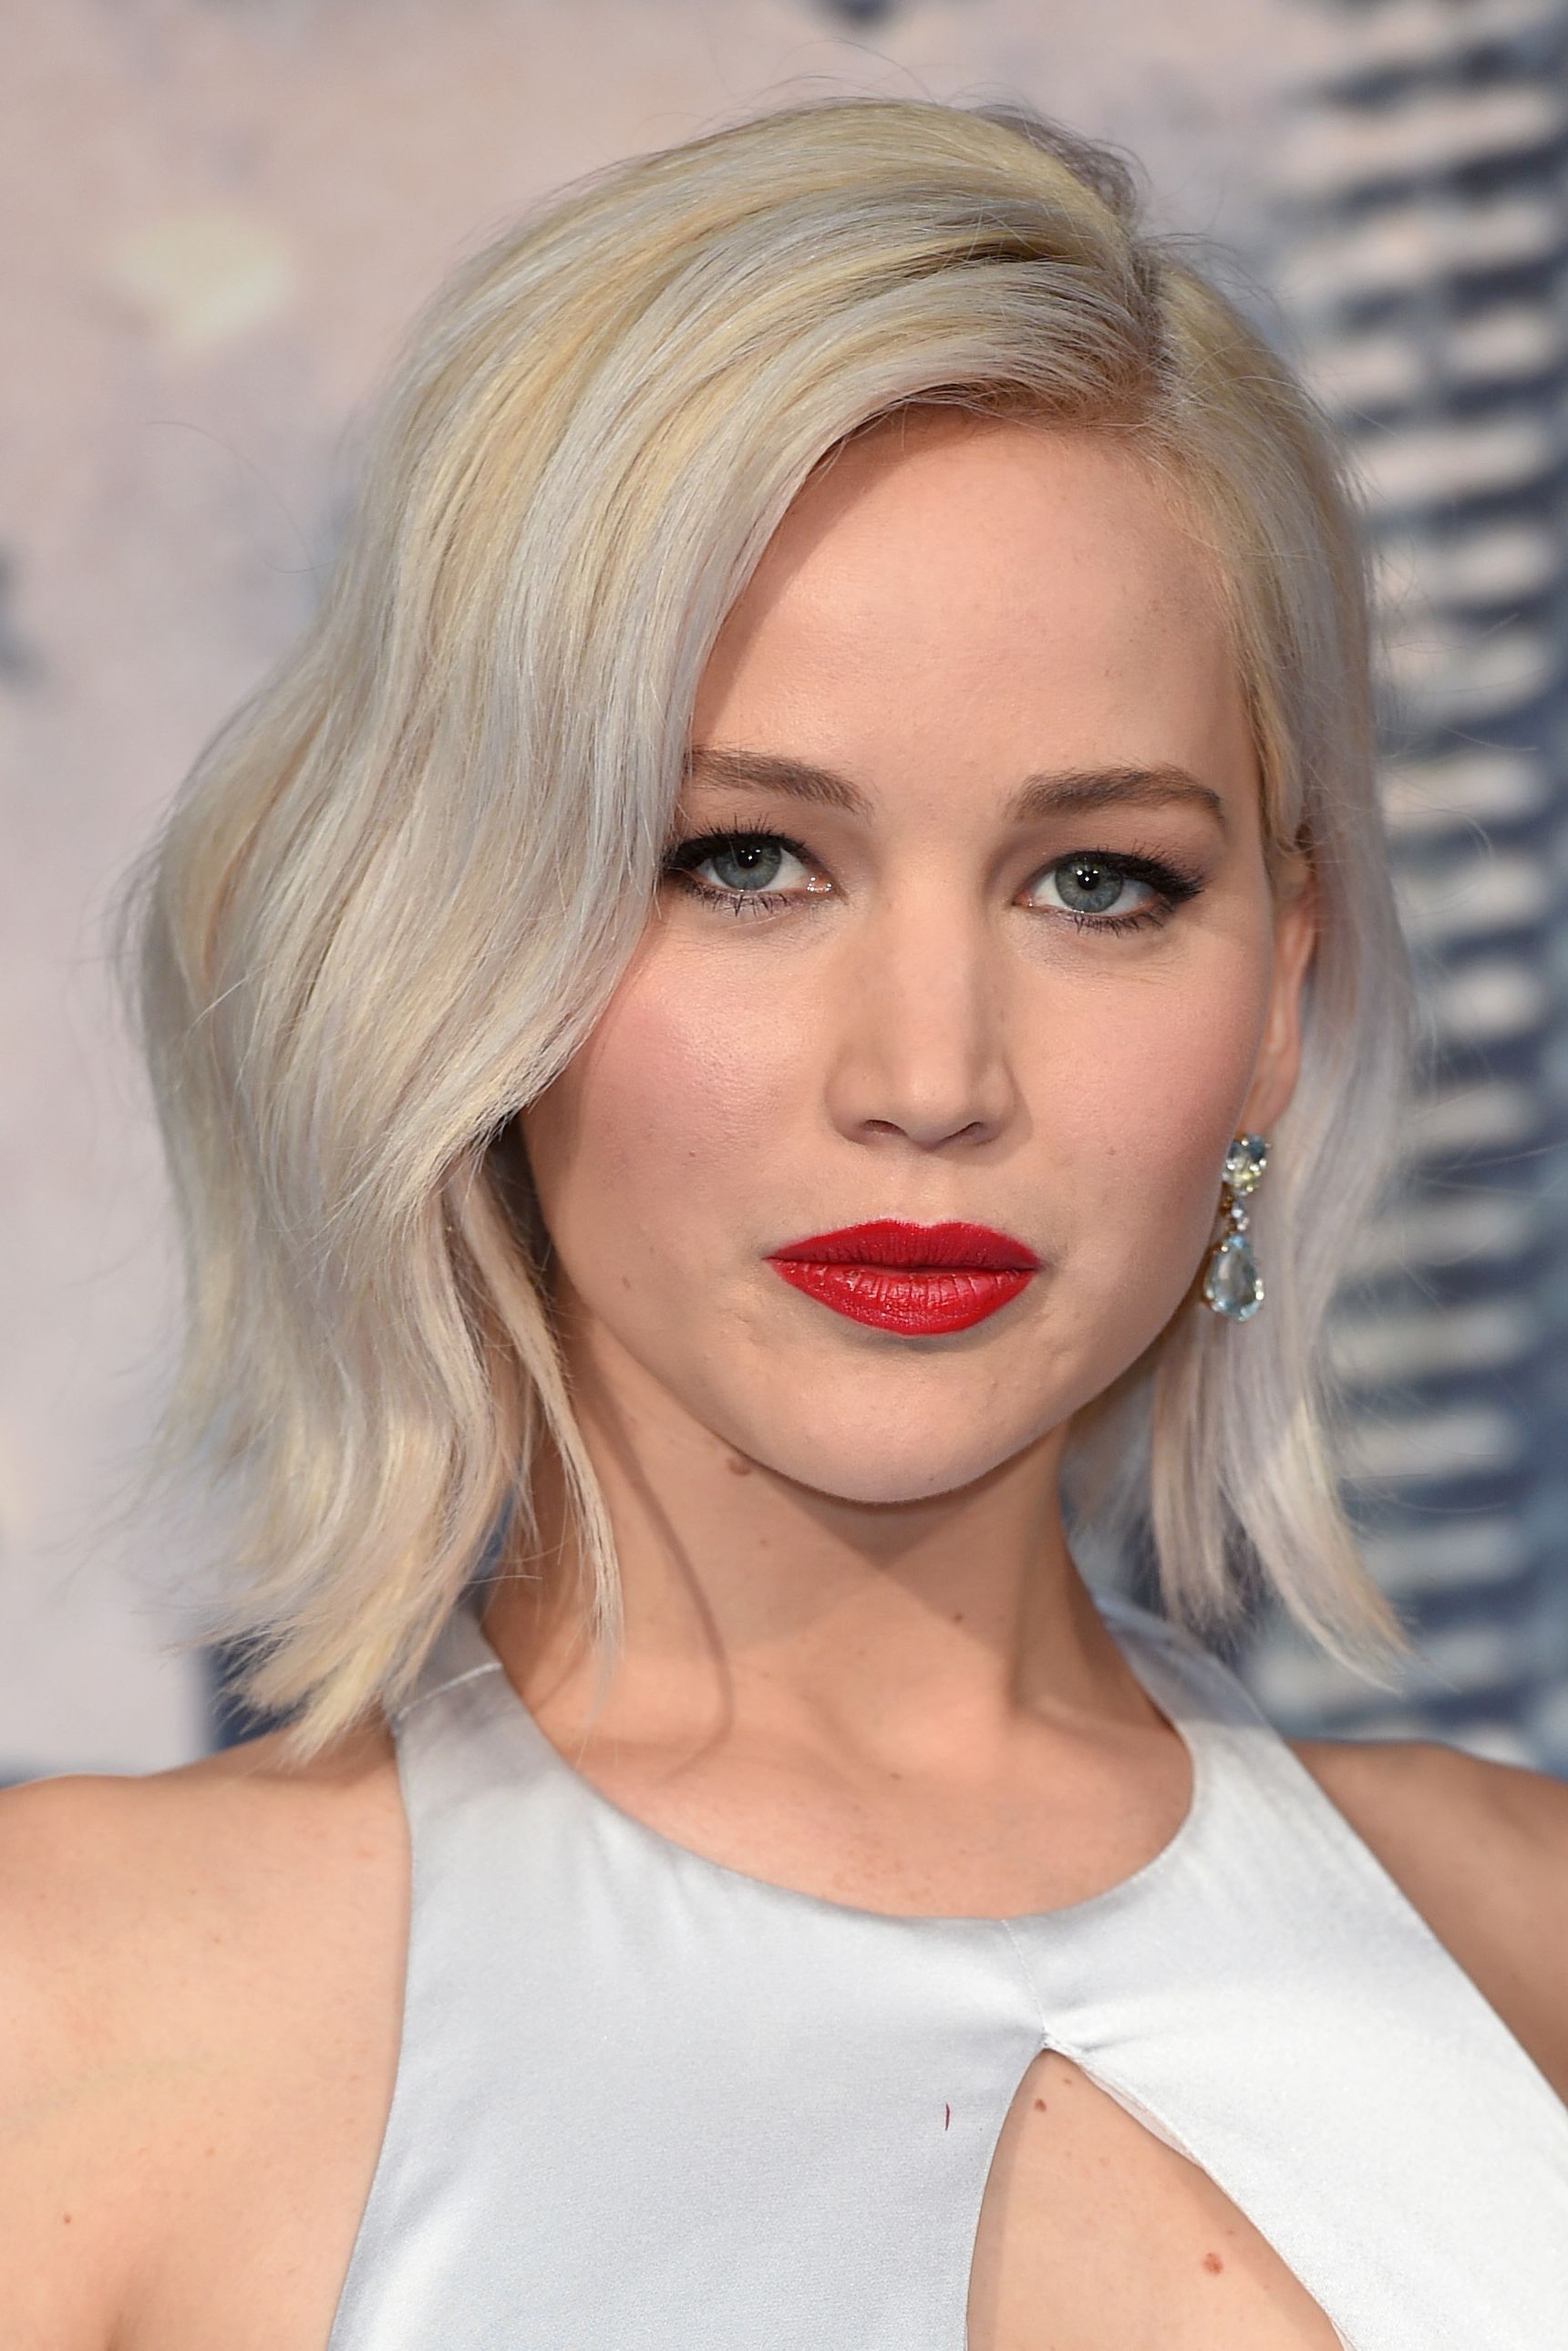 Bleached Blonde Hair Ideas - Pictures Of Celebrities With White Blonde Hair